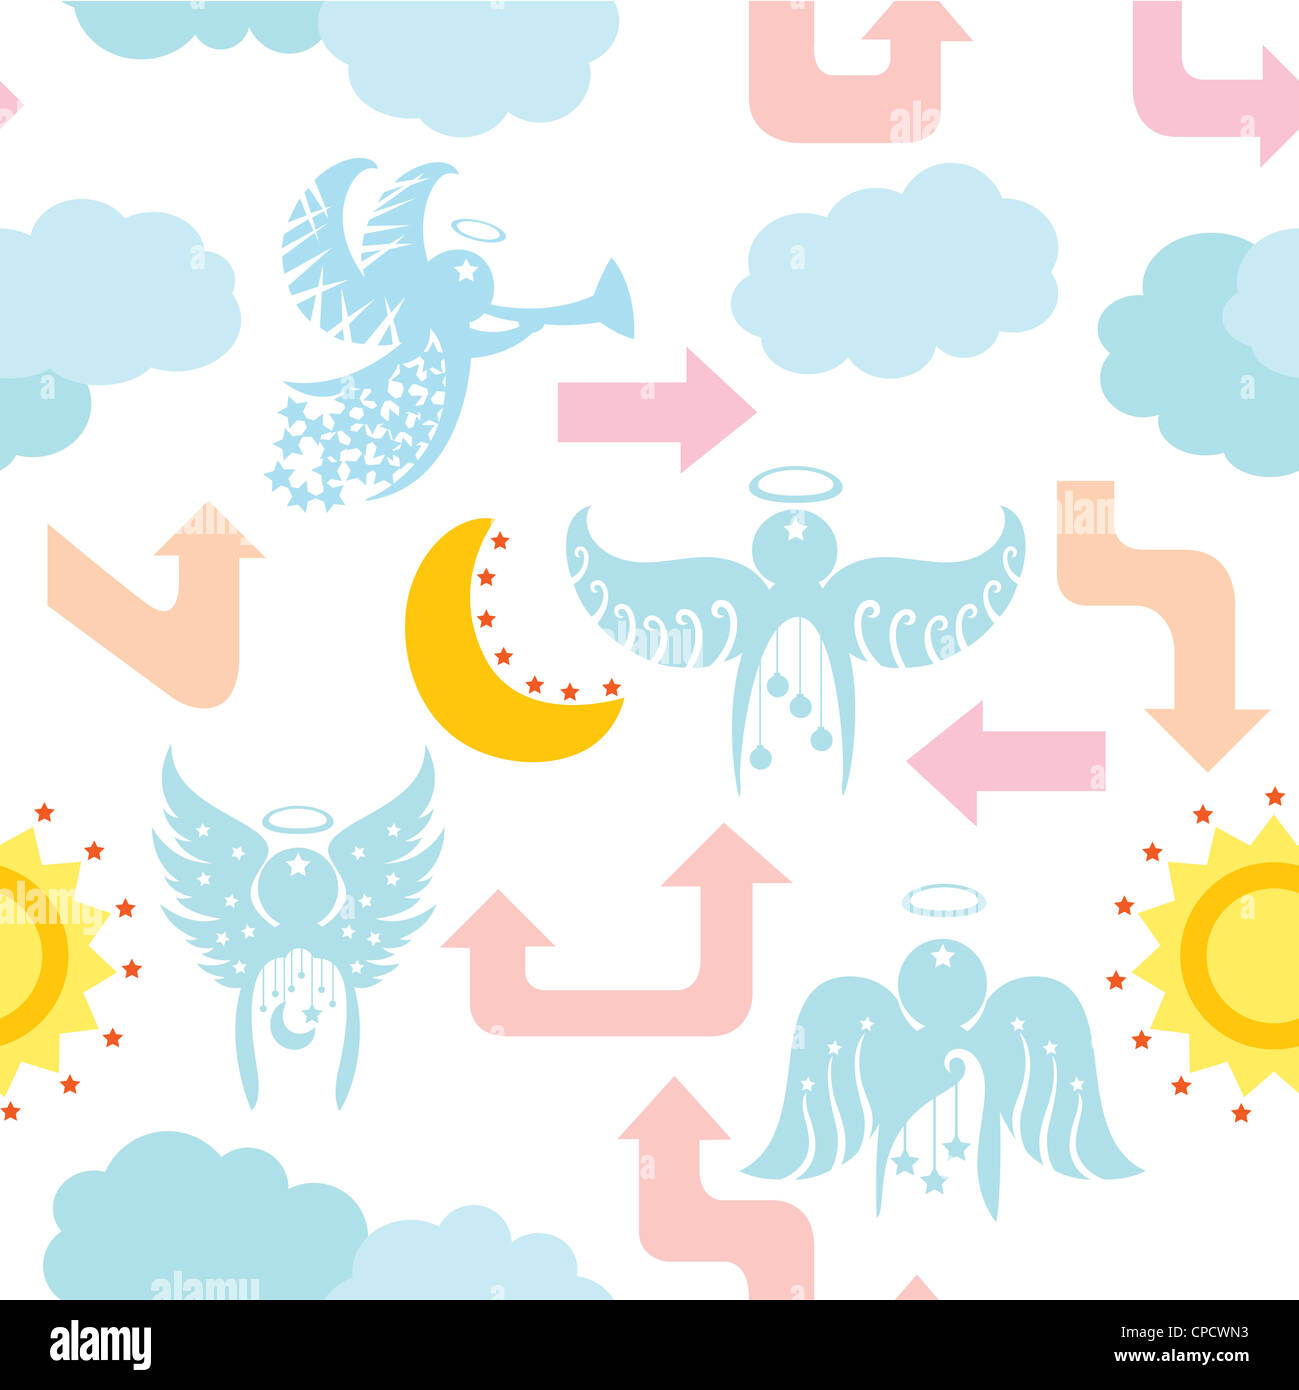 A seamless pattern of angels with arrows head pointing up and down, depicting heaven. Stock Photo